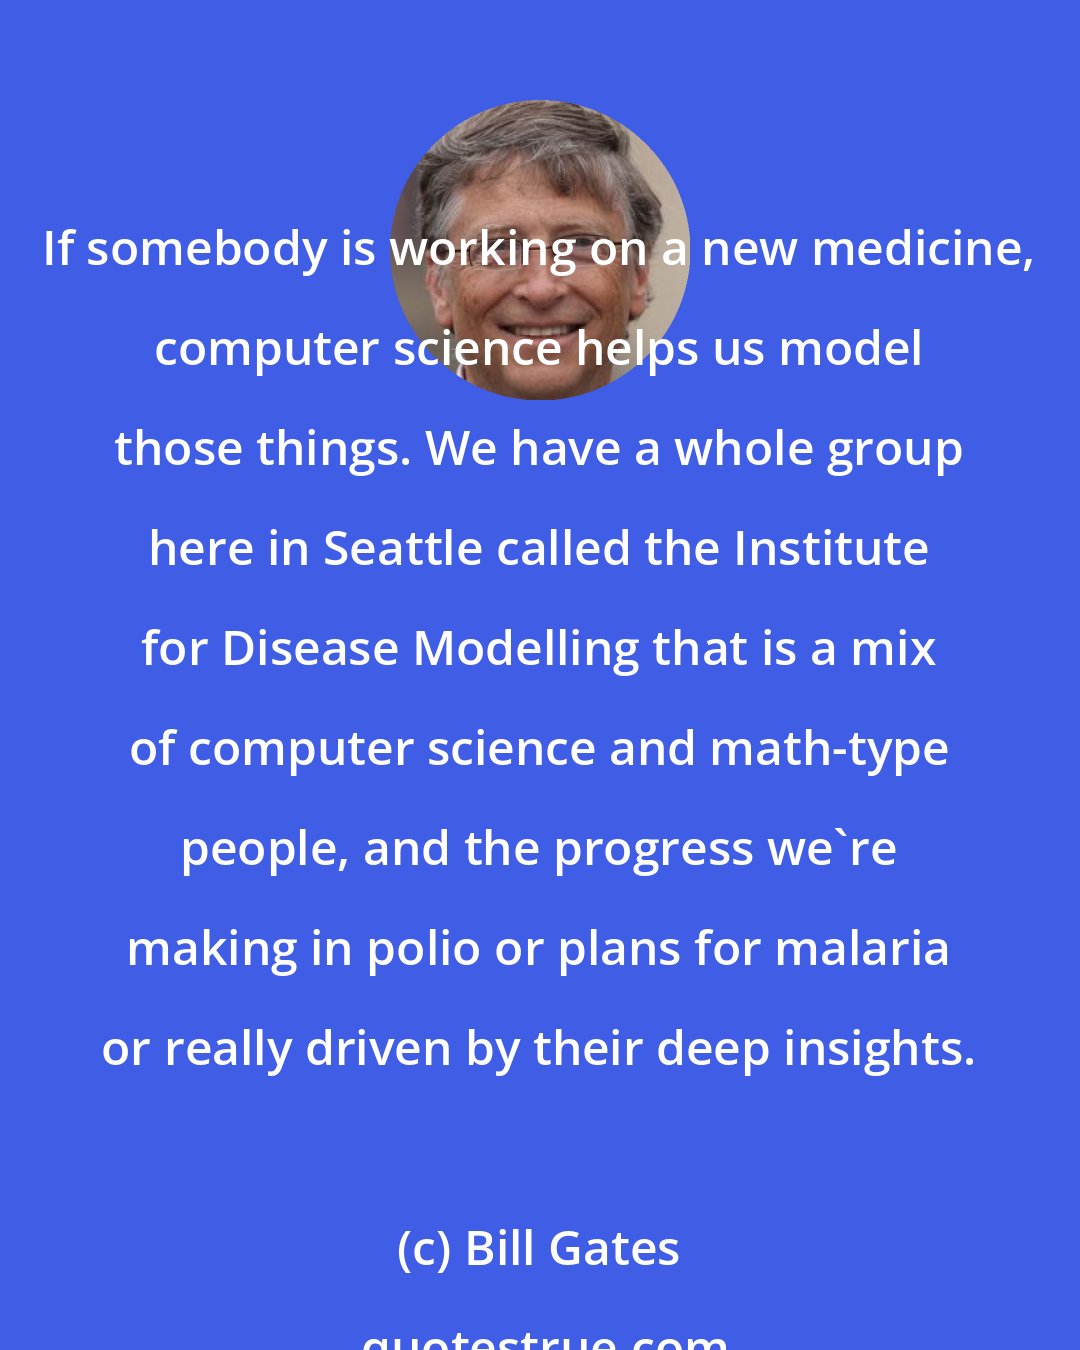 Bill Gates: If somebody is working on a new medicine, computer science helps us model those things. We have a whole group here in Seattle called the Institute for Disease Modelling that is a mix of computer science and math-type people, and the progress we're making in polio or plans for malaria or really driven by their deep insights.